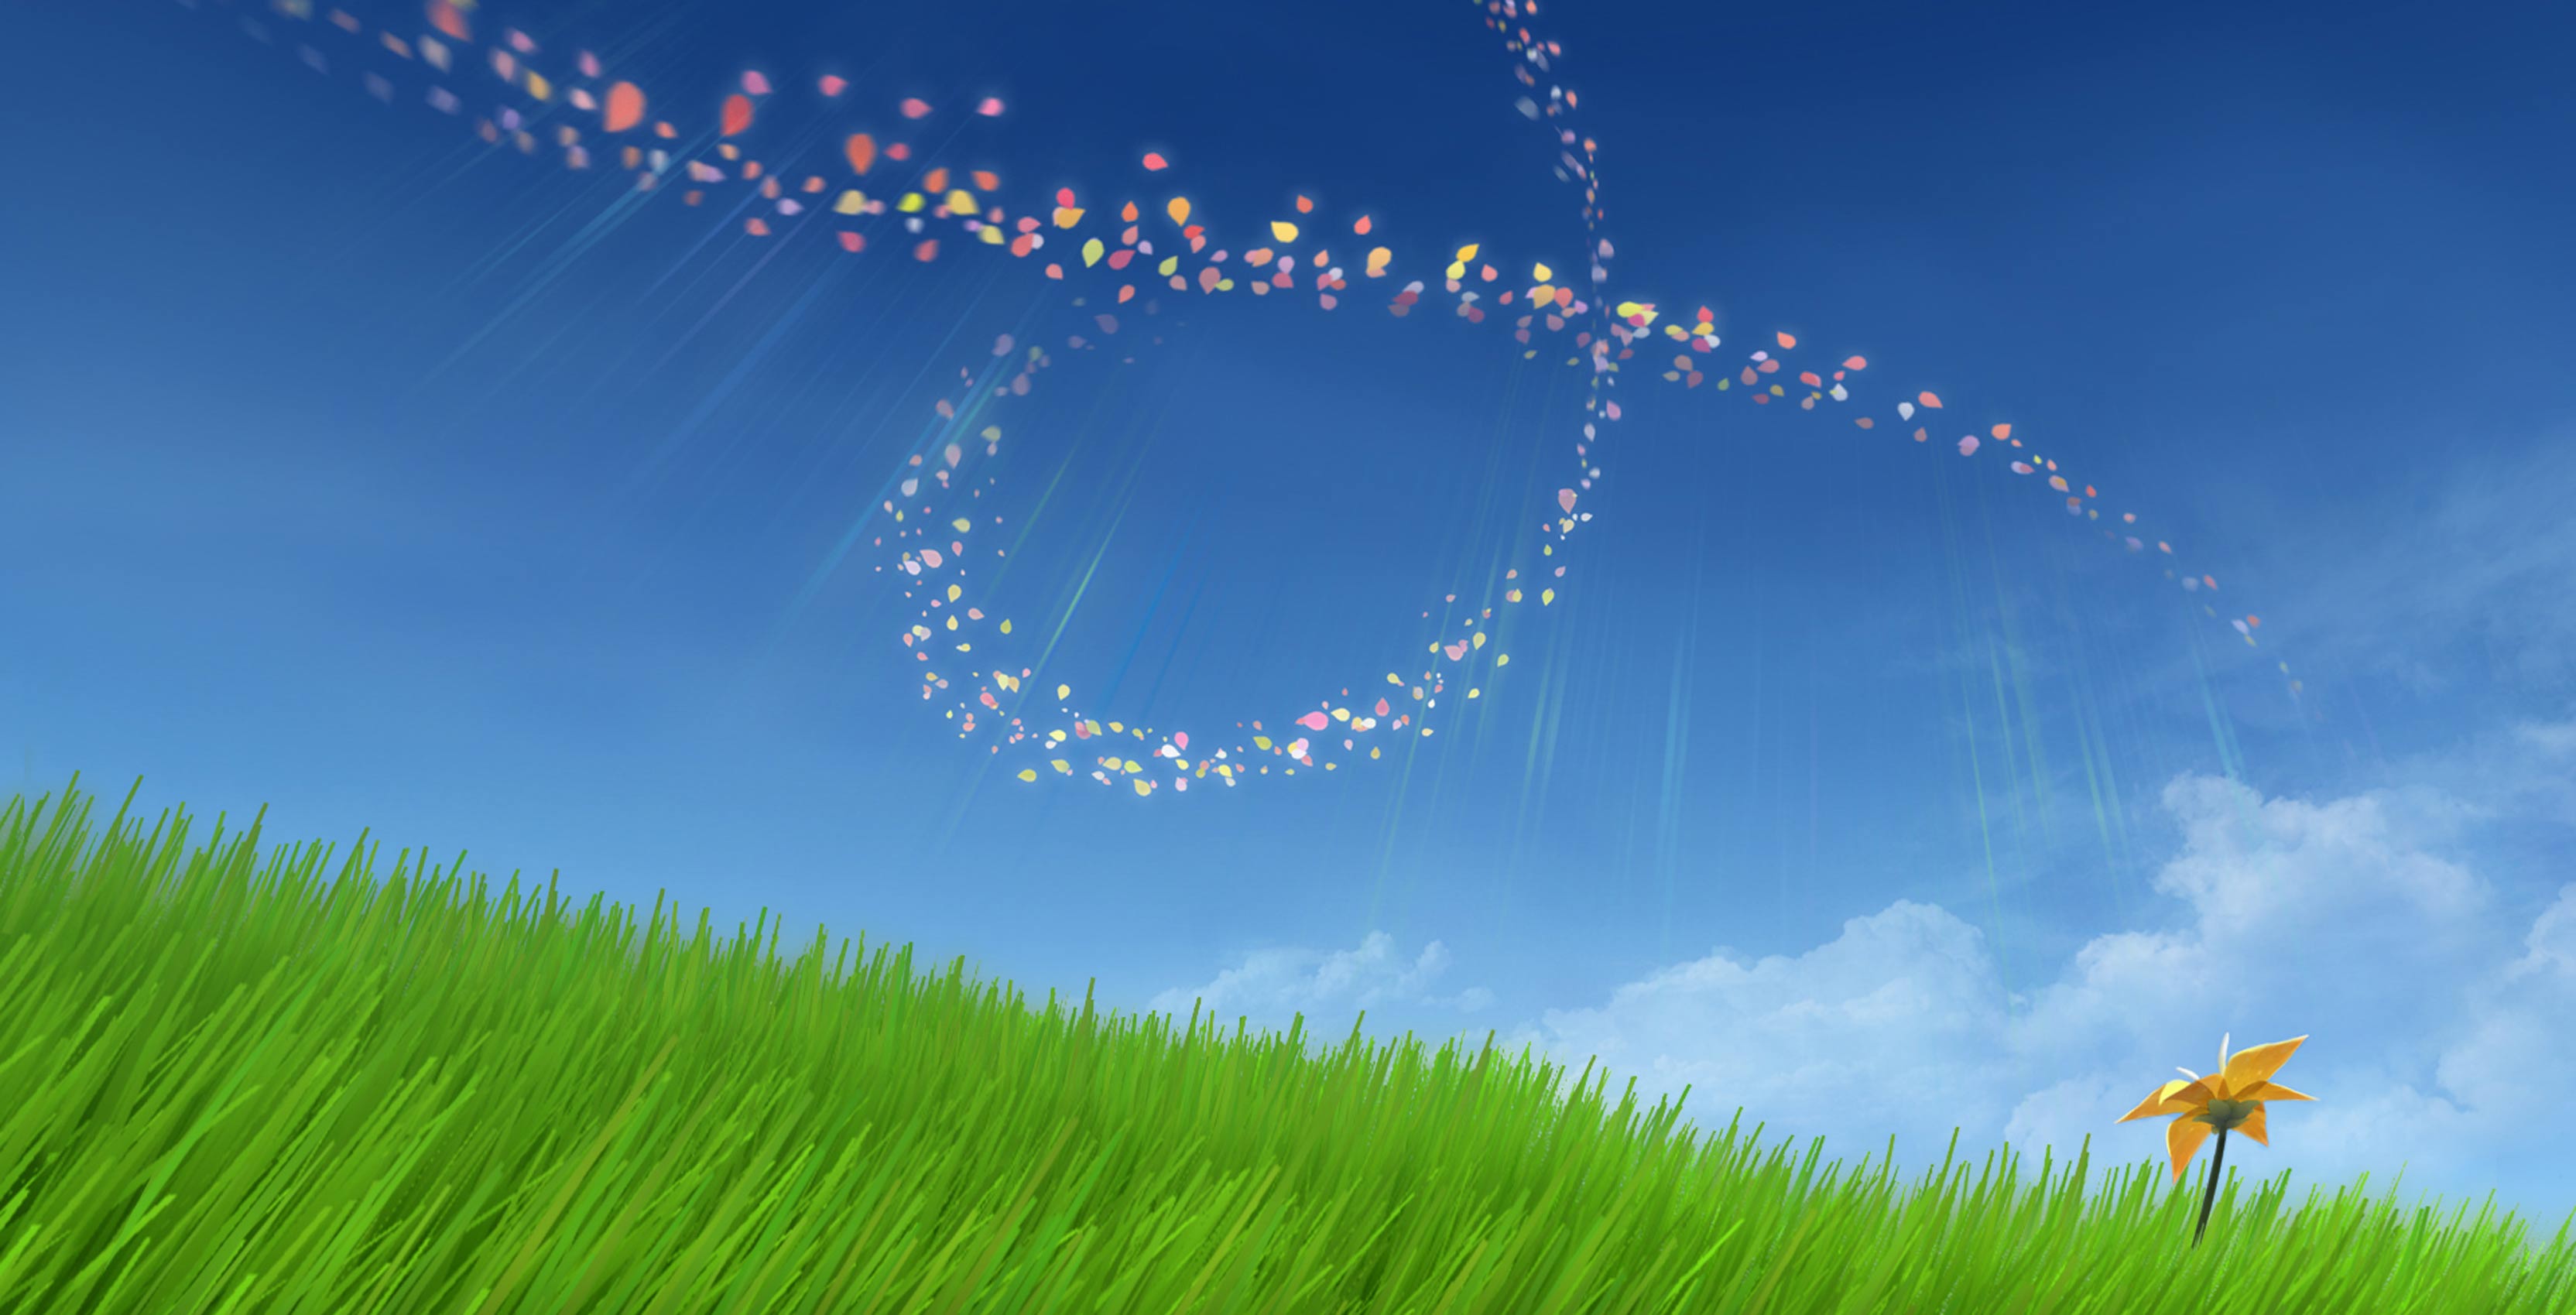 Flower is the second game from Thatgamecompany